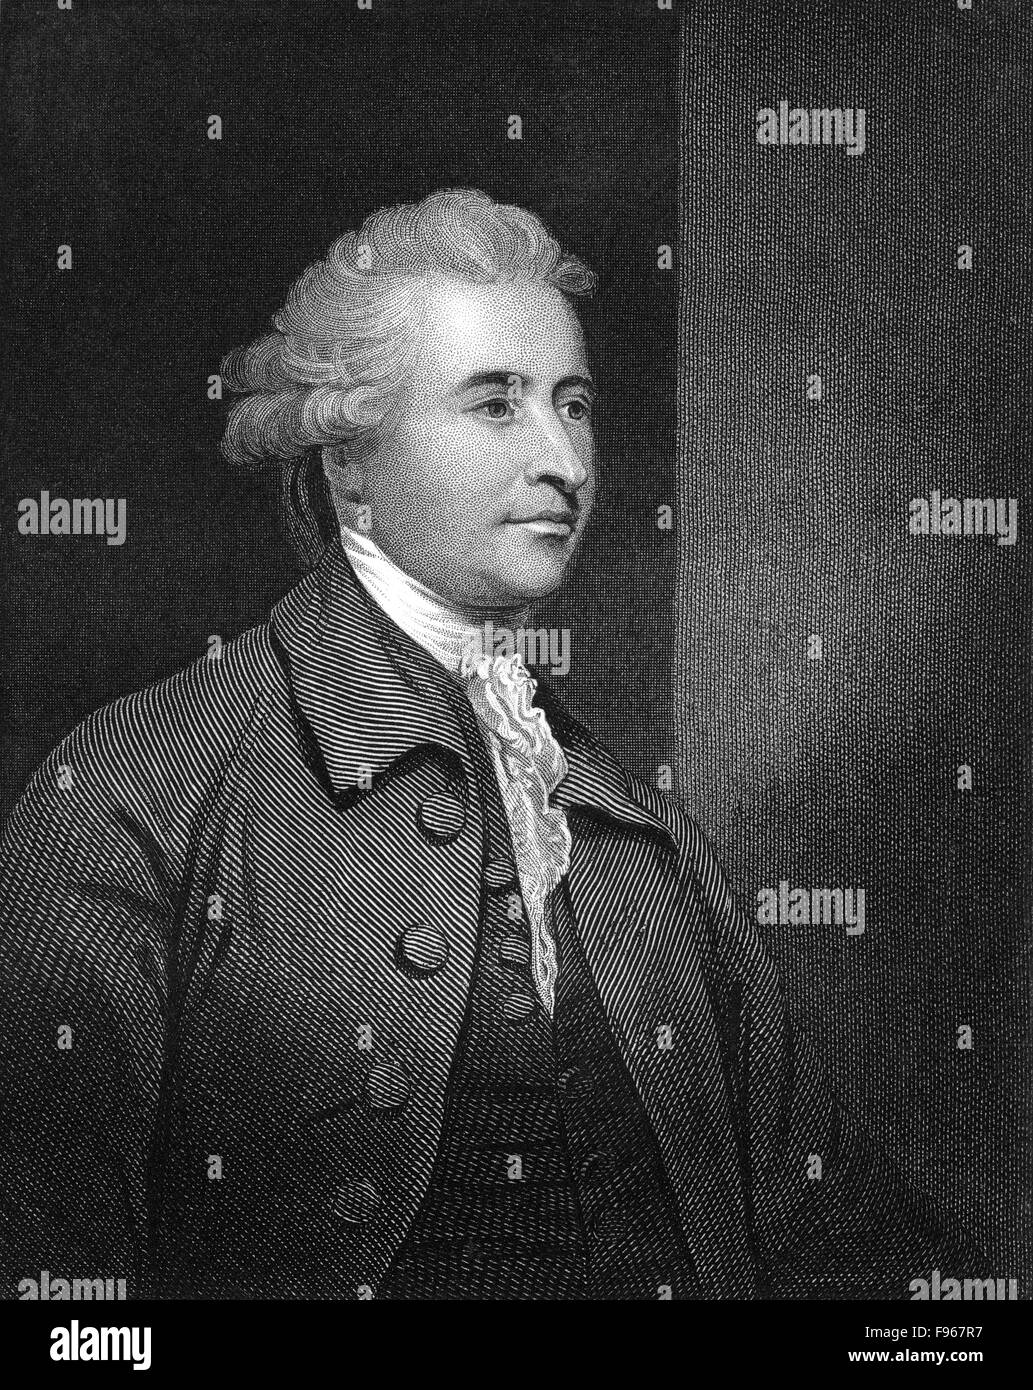 Edmund Burke, 1729 - 1797, a British writer, political philosopher and politician during the Age of Enlightenment, Stock Photo